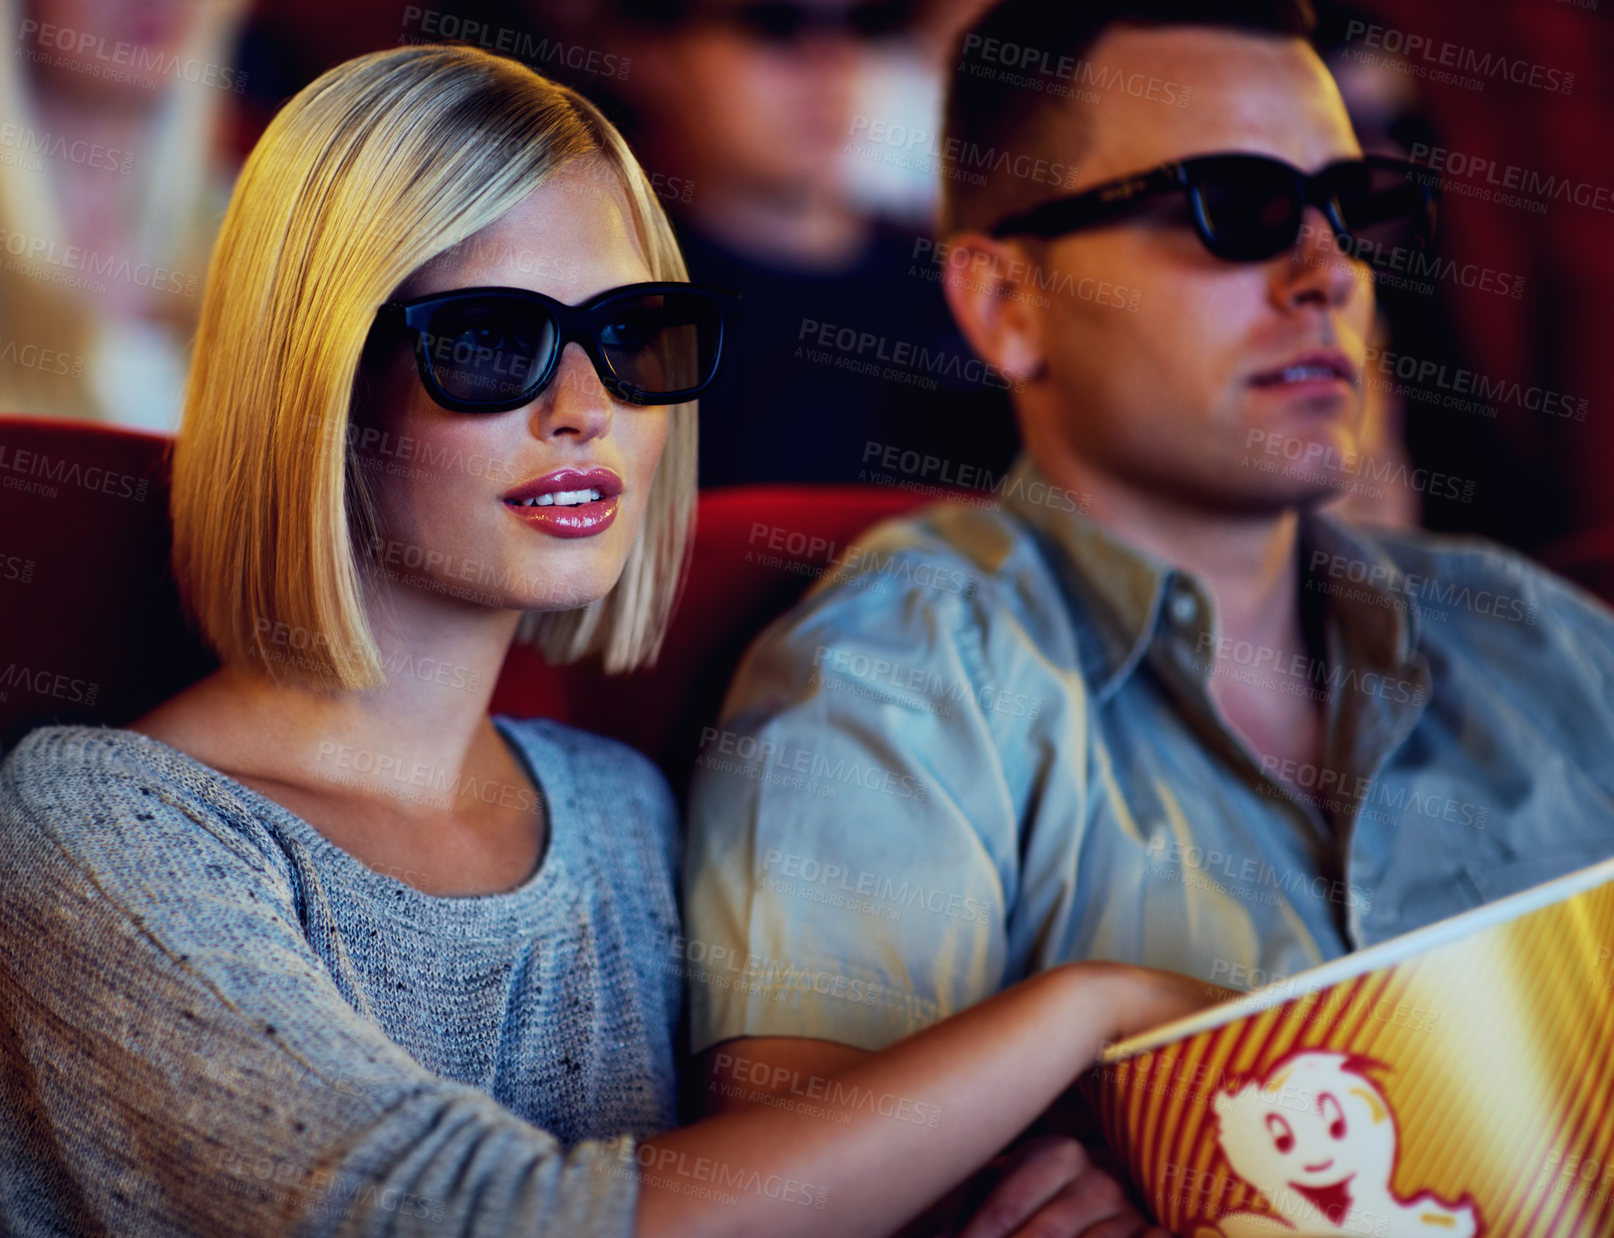 Buy stock photo Couple, 3D movie and cinema of a man and woman sitting and eating popcorn together wearing glasses. People in a relationship watching a film in a theatre for indoor entertainment while having snacks.